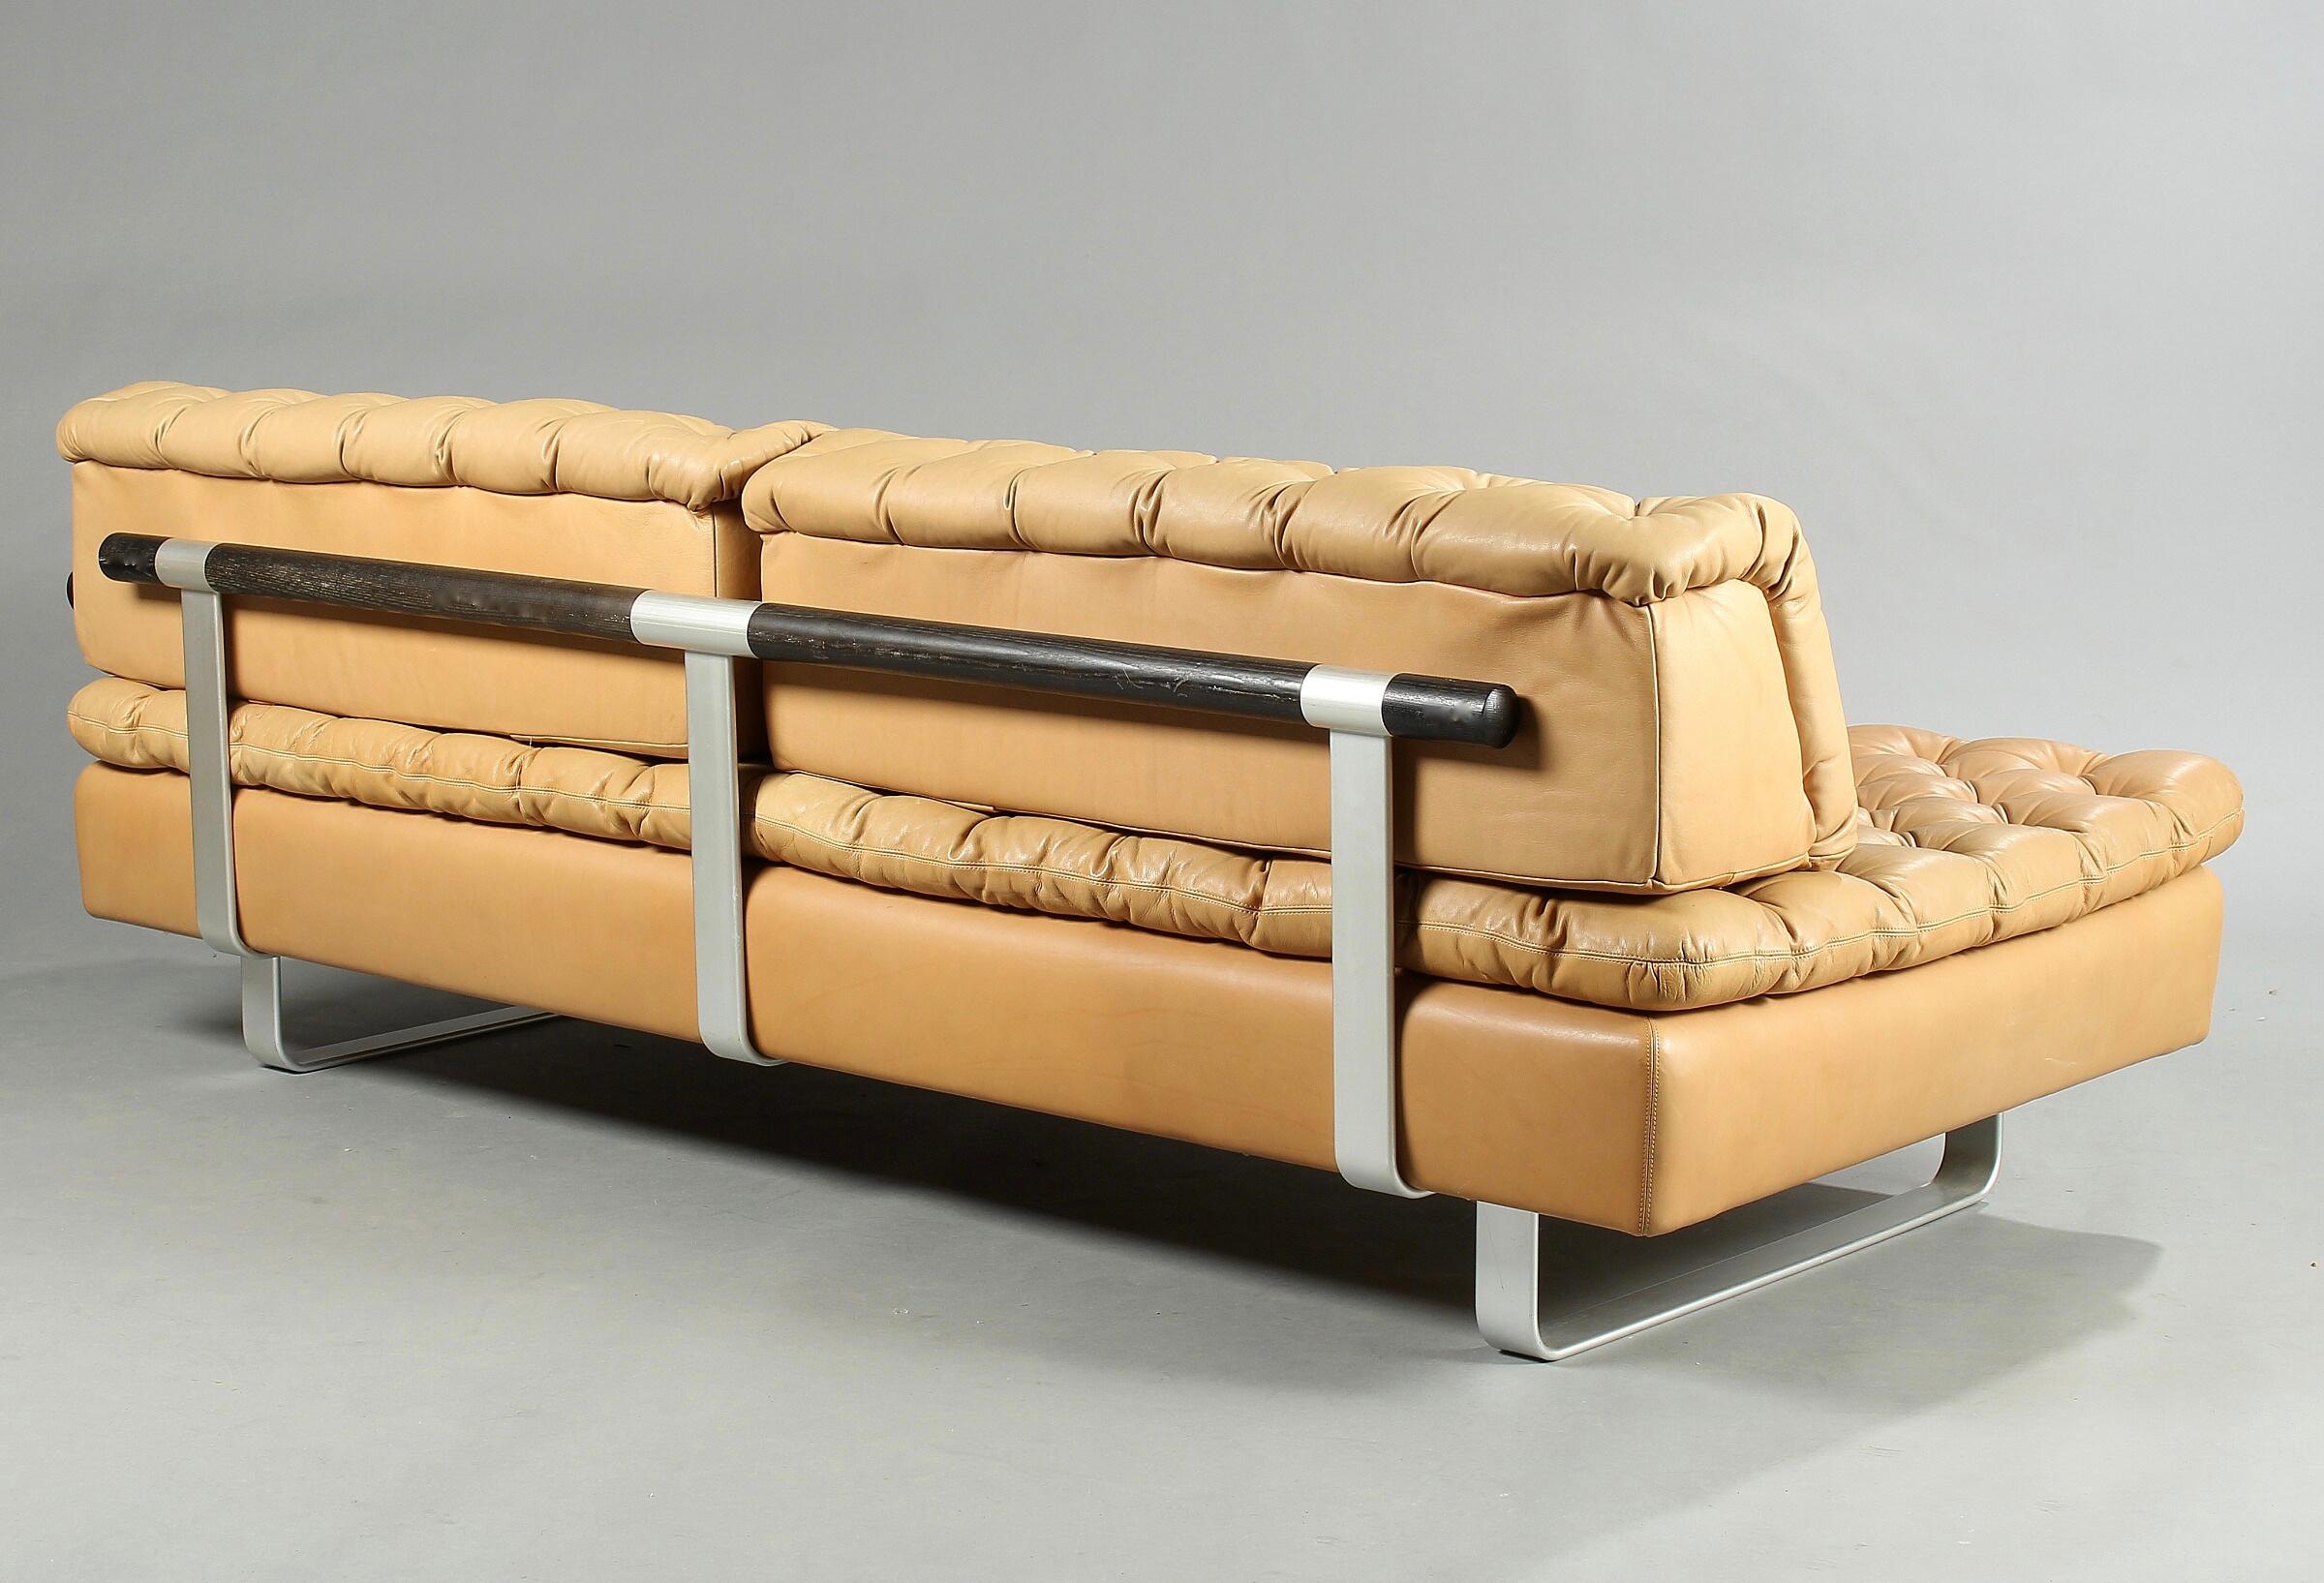 DUX Daybed Upholstered with Natural Coloured Leather In Good Condition For Sale In Vejle, DK